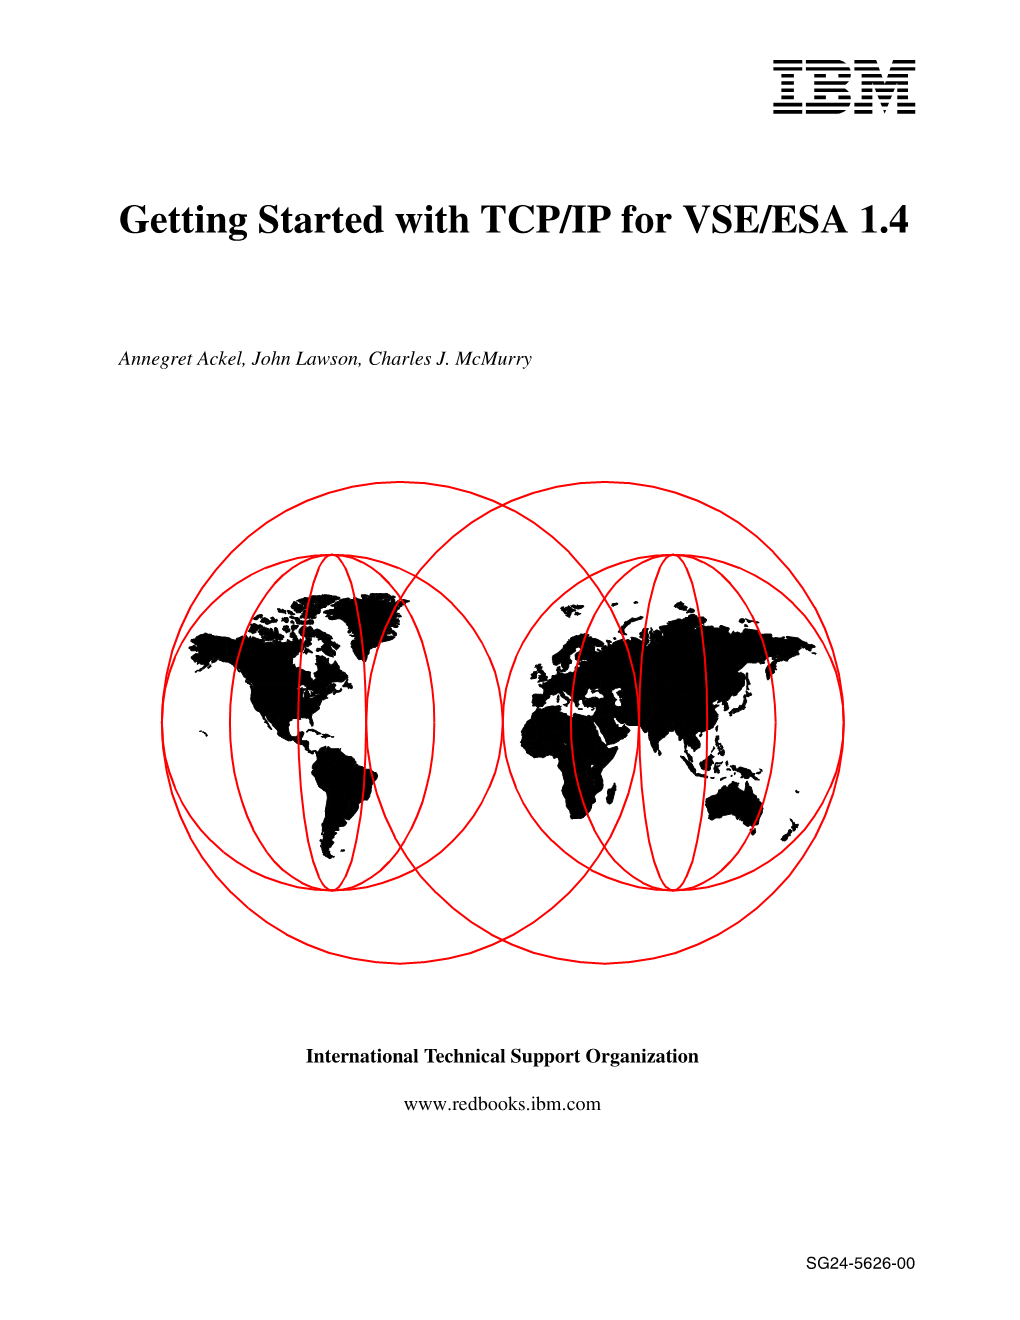 Getting Started with TCP/IP for VSE/ESA 1.4